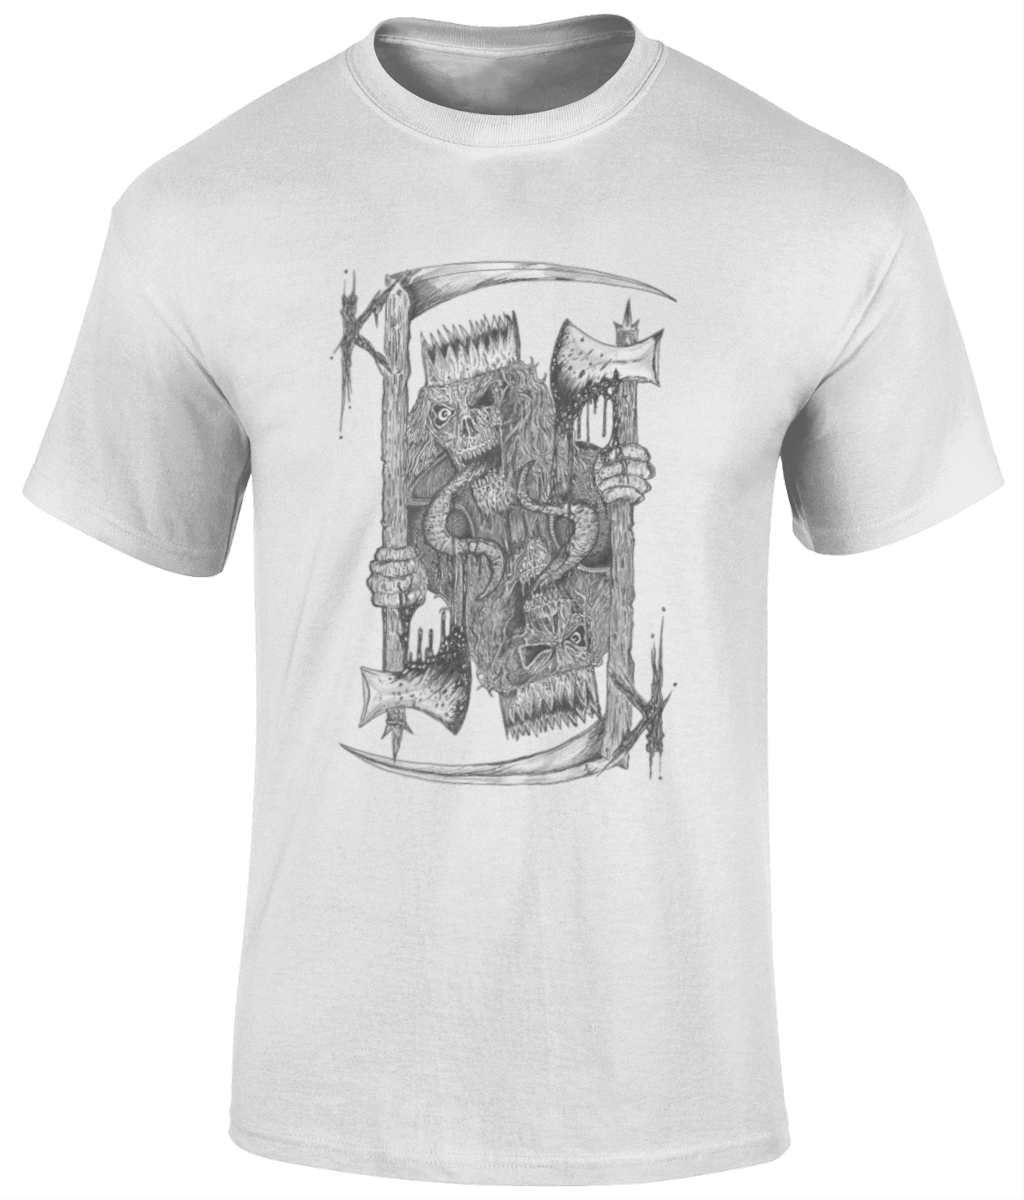 POISON VALLEY CLOTHING "ZOMBIE KING" UNISEX T SHIRT.  Hand drawn artwork by David Pankhurst.  Available in Black and White.  Material: 100% cotton.  Seamless twin needle collar. Taped neck and shoulders. Tubular body. Twin needle sleeves and hem. SIZES: Small, Medium, Large, X-Large 2XL, 3XL, 4XL and 5XL